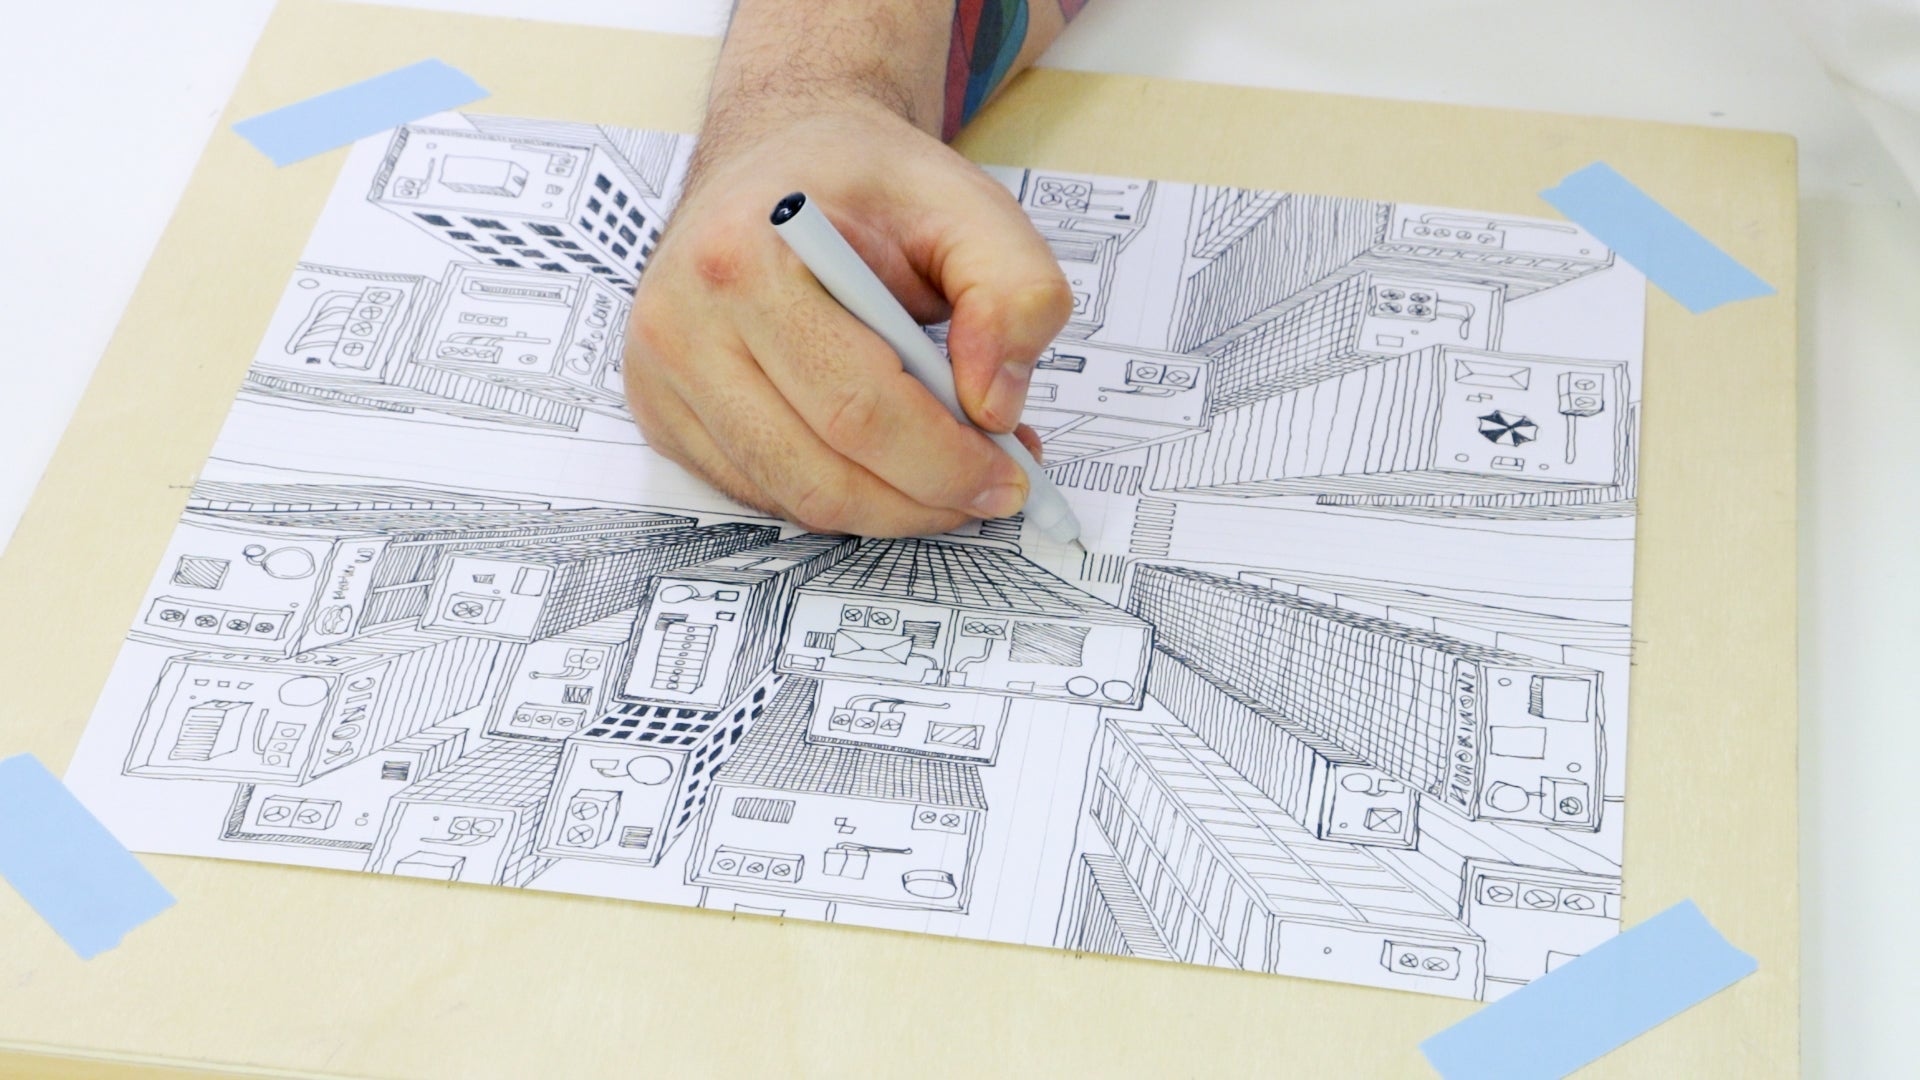 3. One-point perspective drawing of city skyscrapers